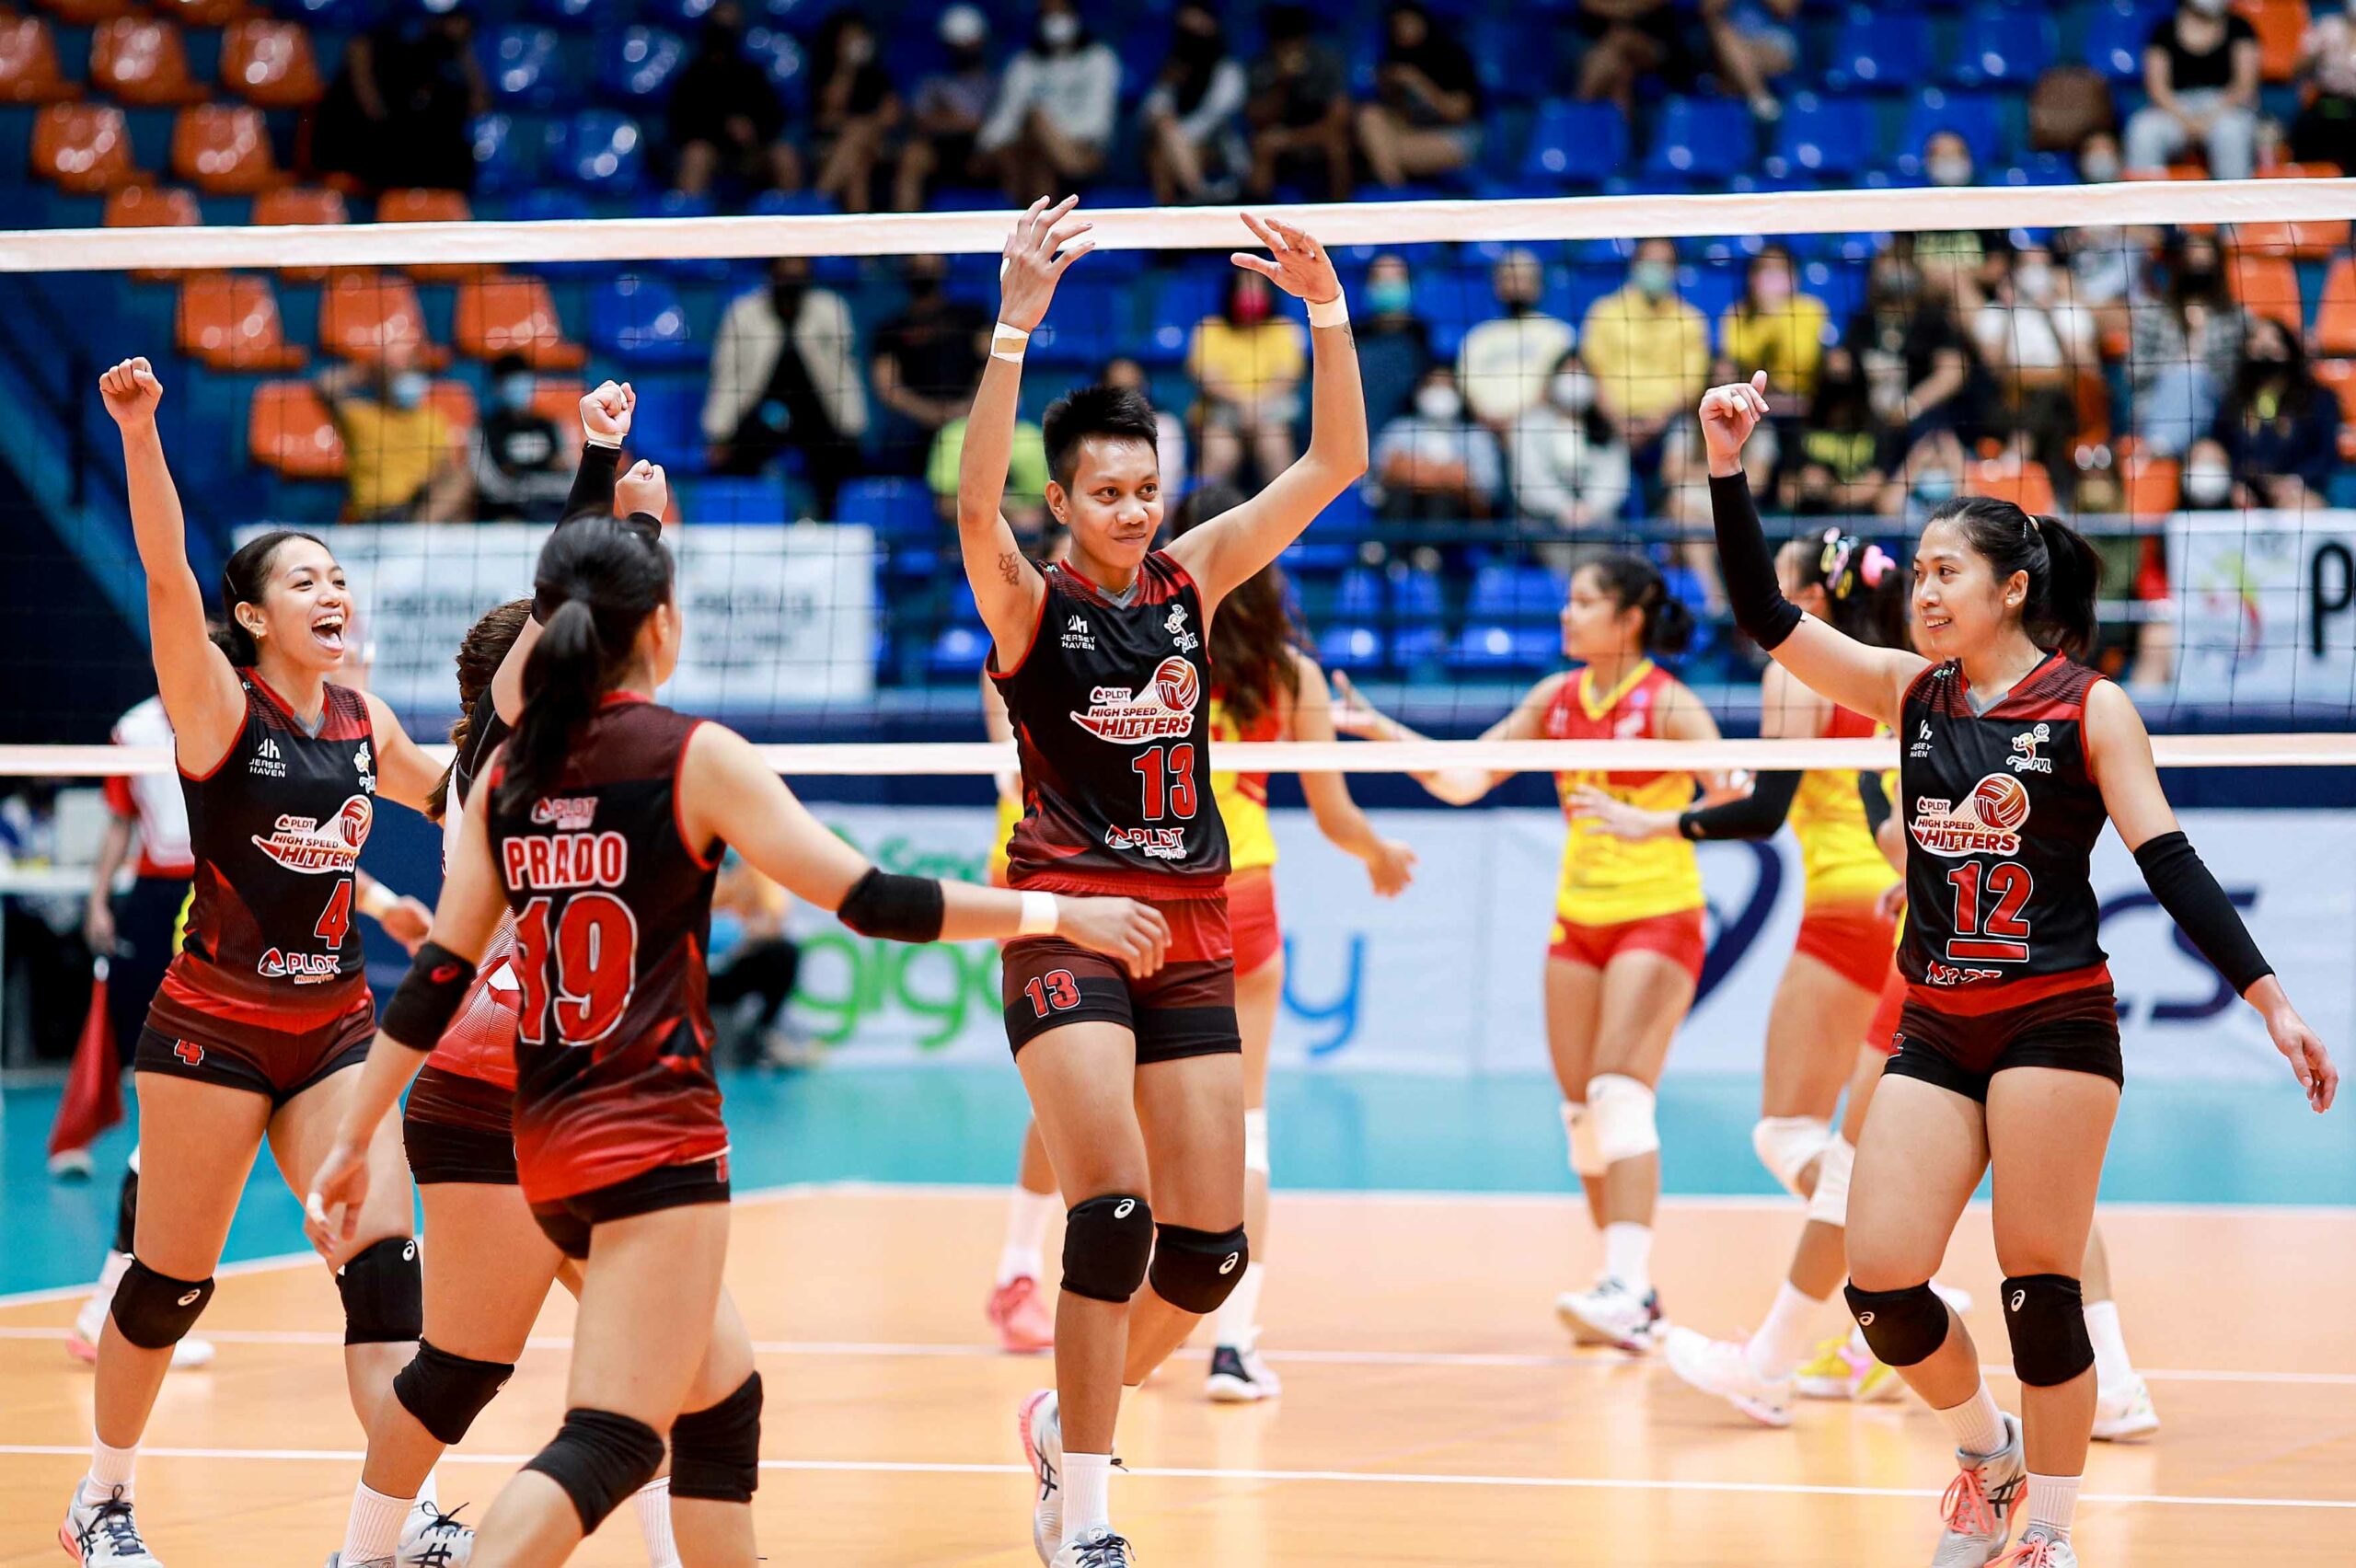 2022-PVL-f2-vs-pldt-jules-samonte-jovie-prado-dell-palomata-rhea-dimaculangan-scaled George Pascua satisfied with outcome of maiden campaign with PLDT News PVL Volleyball  - philippine sports news